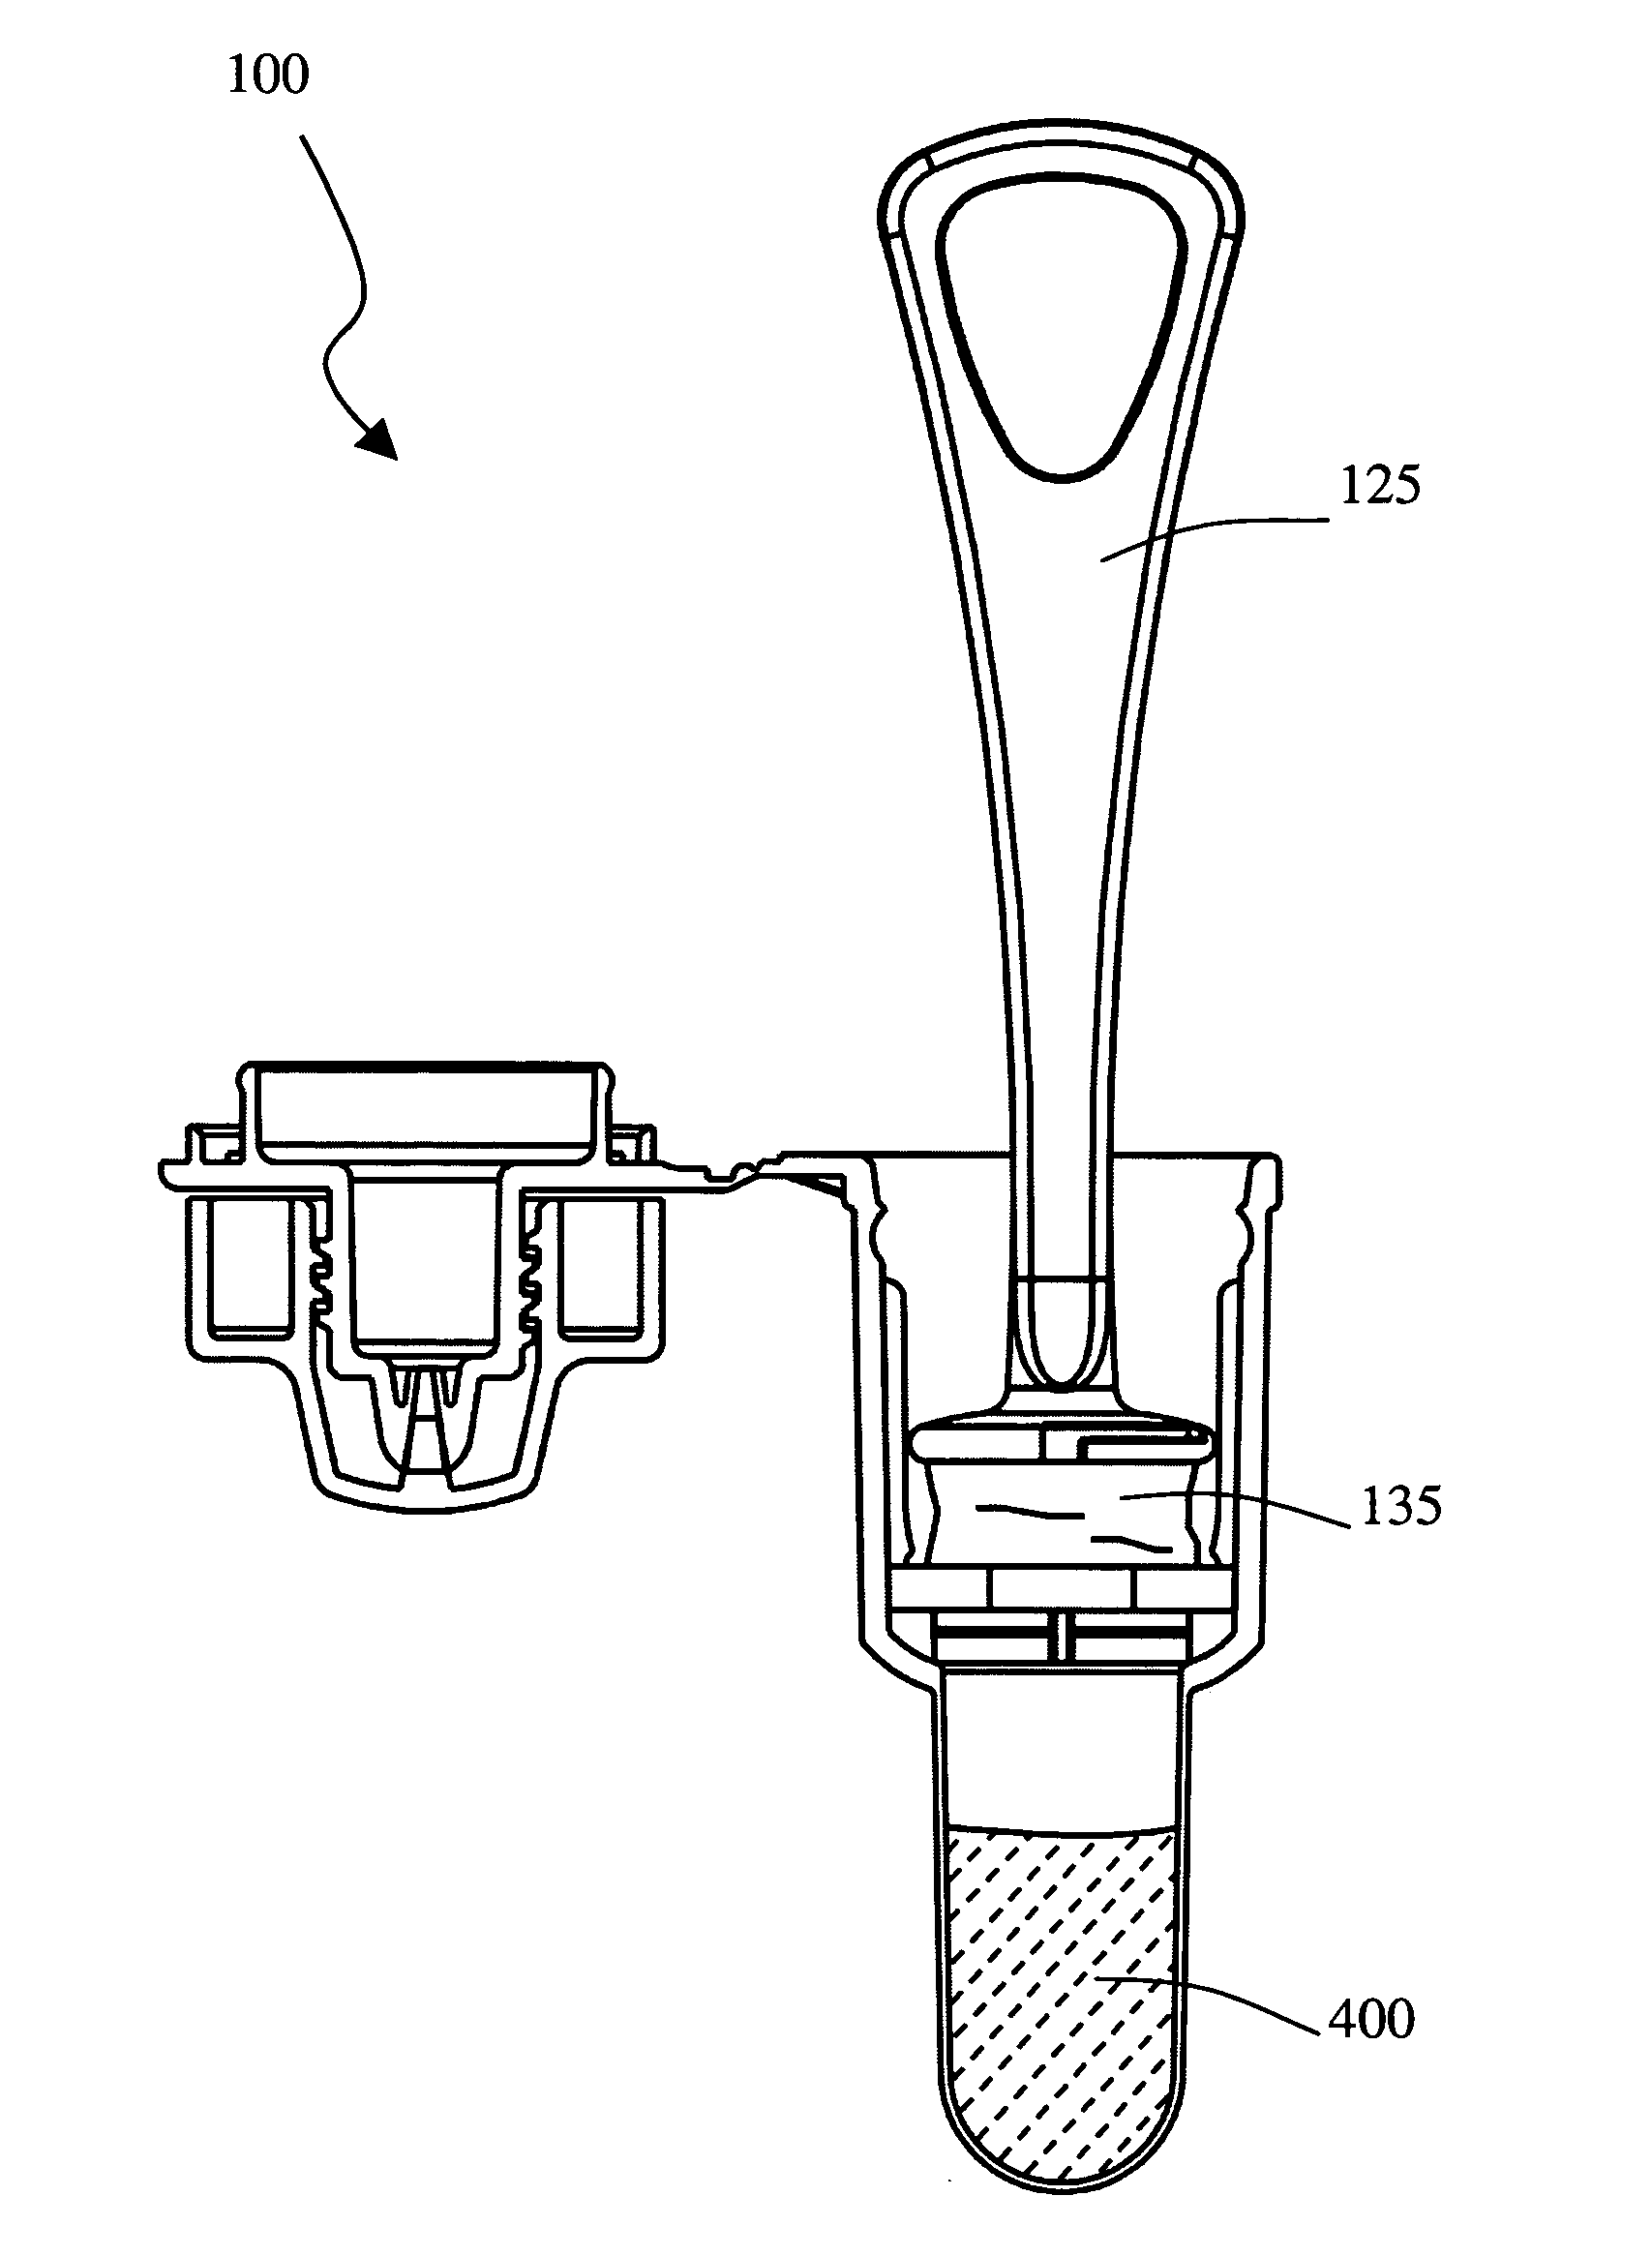 Fluid collection and application device and methods of use of same